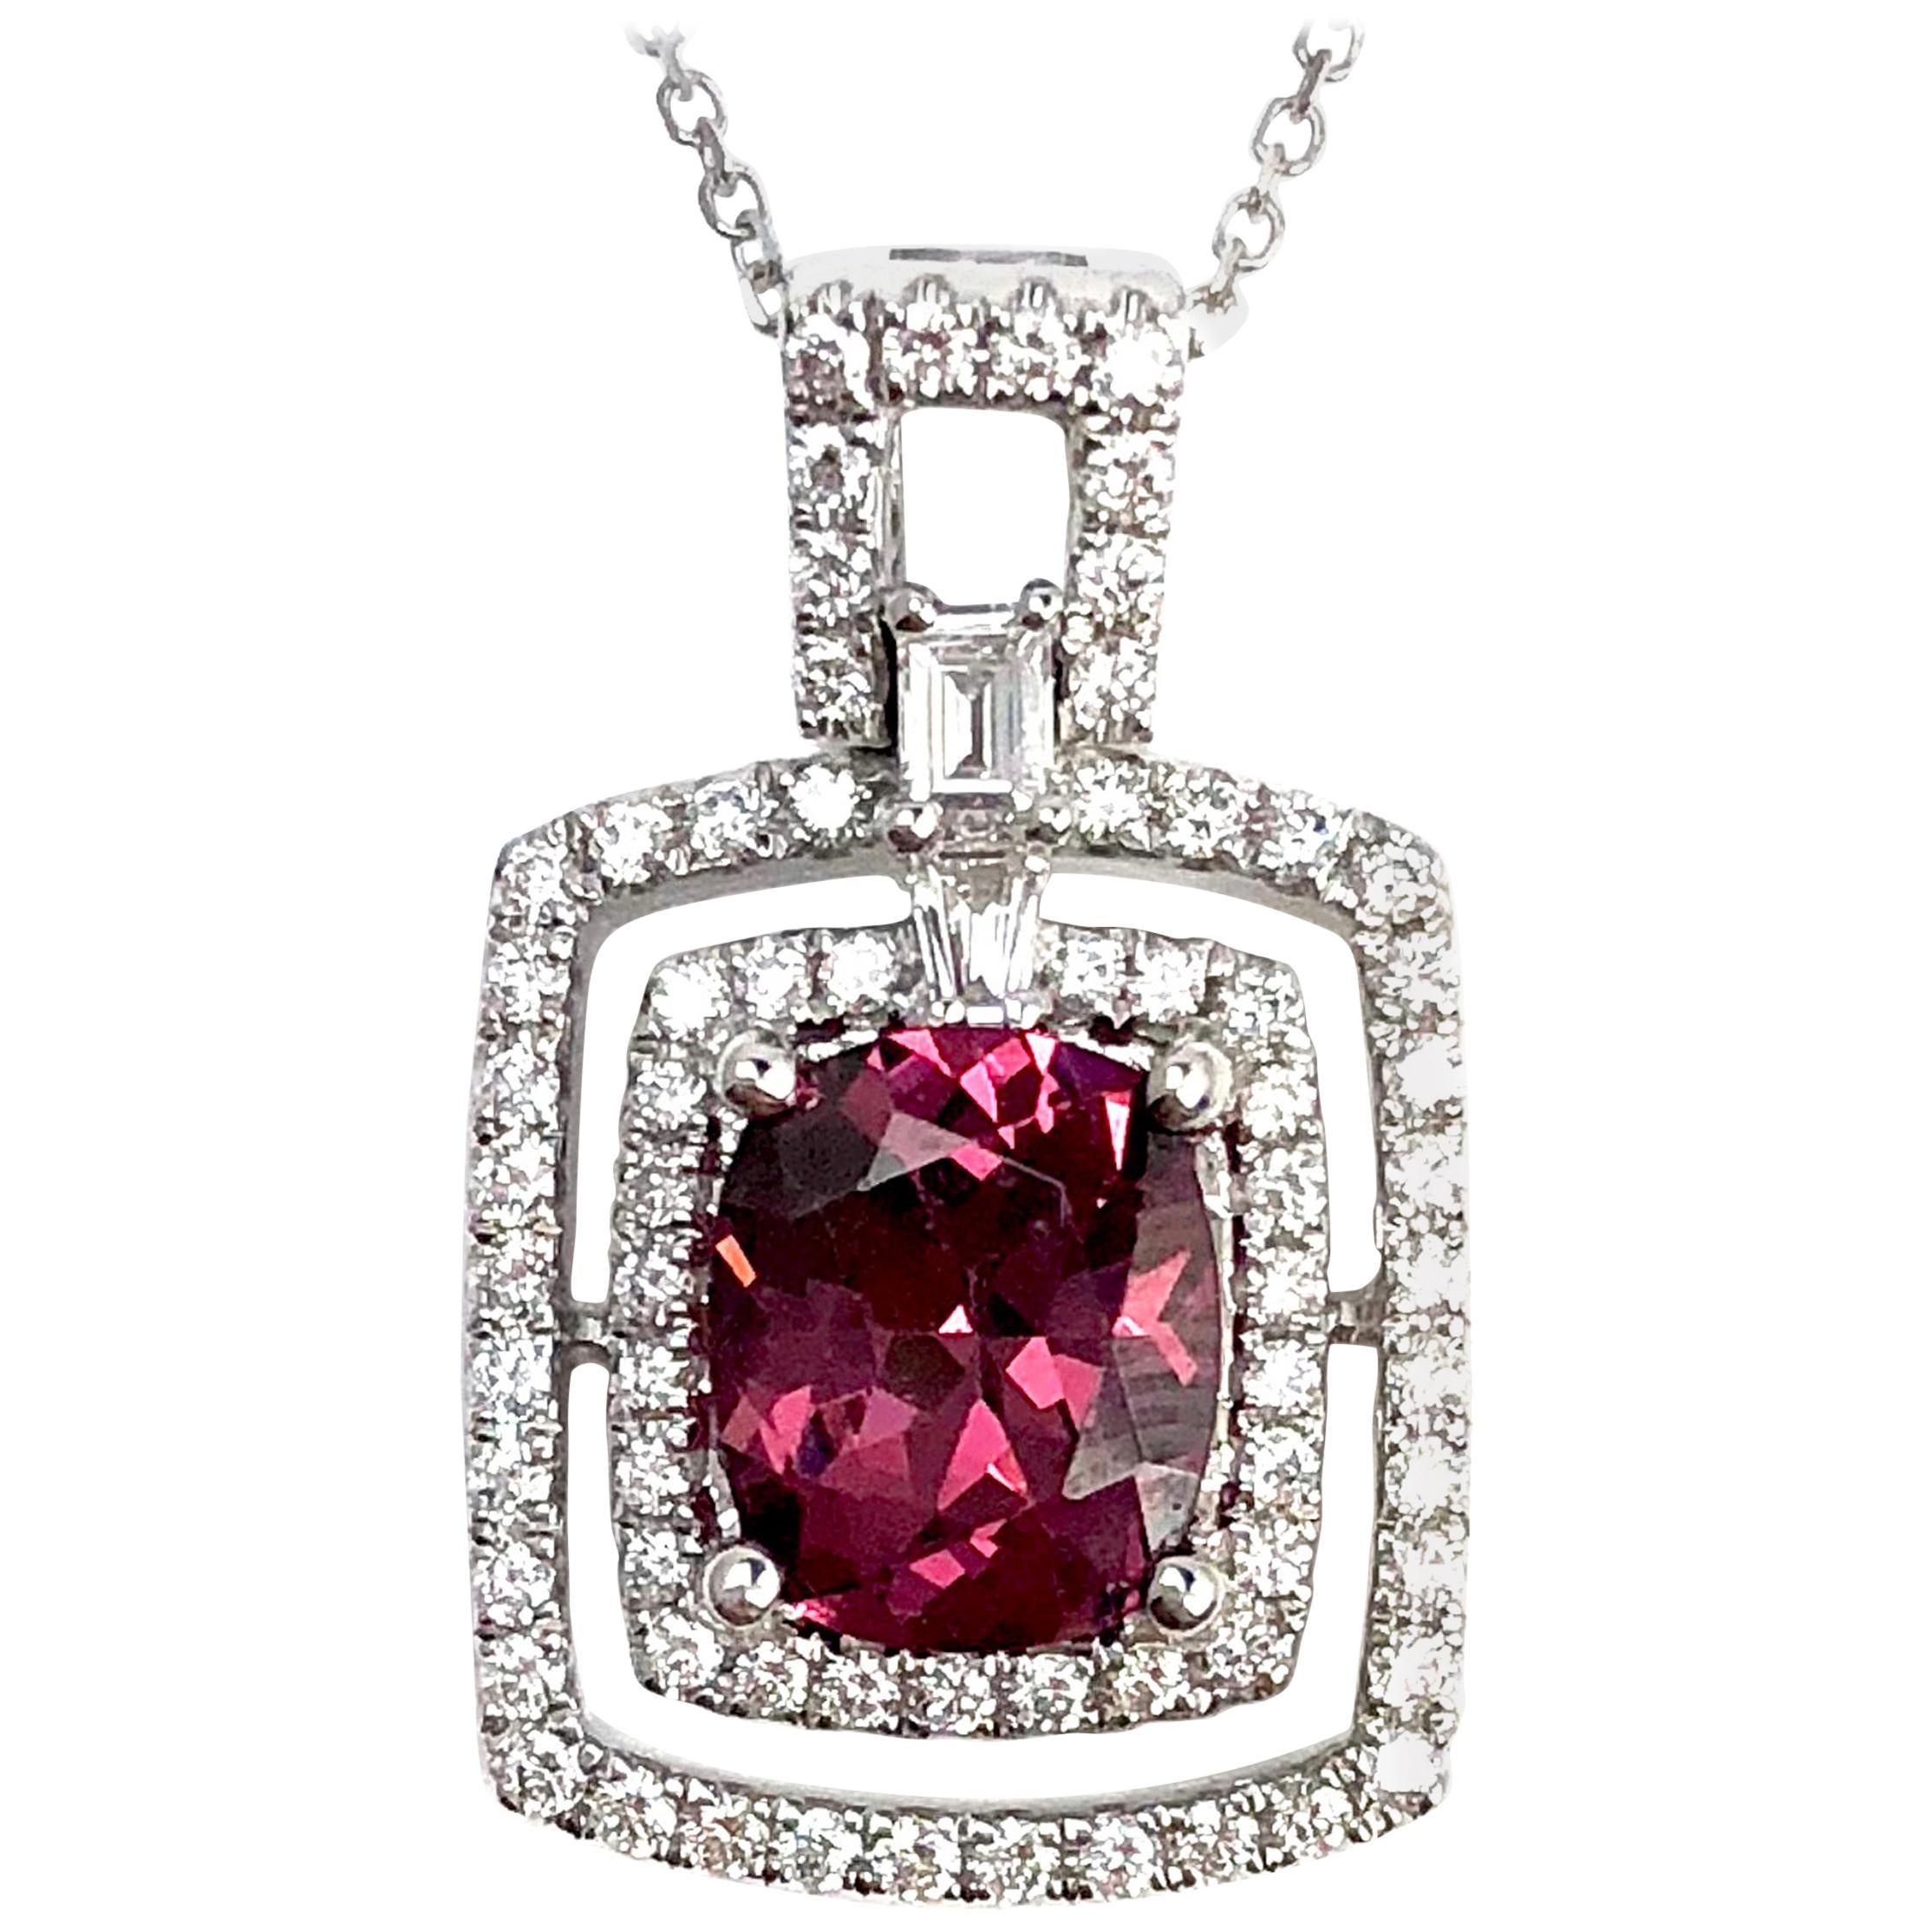 Elevate your style with a pendant that is as unique and captivating as you are. This exquisite piece showcases a 1.75 carat cushion-cut raspberry garnet, surrounded by the brilliance of round white natural diamonds, and complemented by two tapered